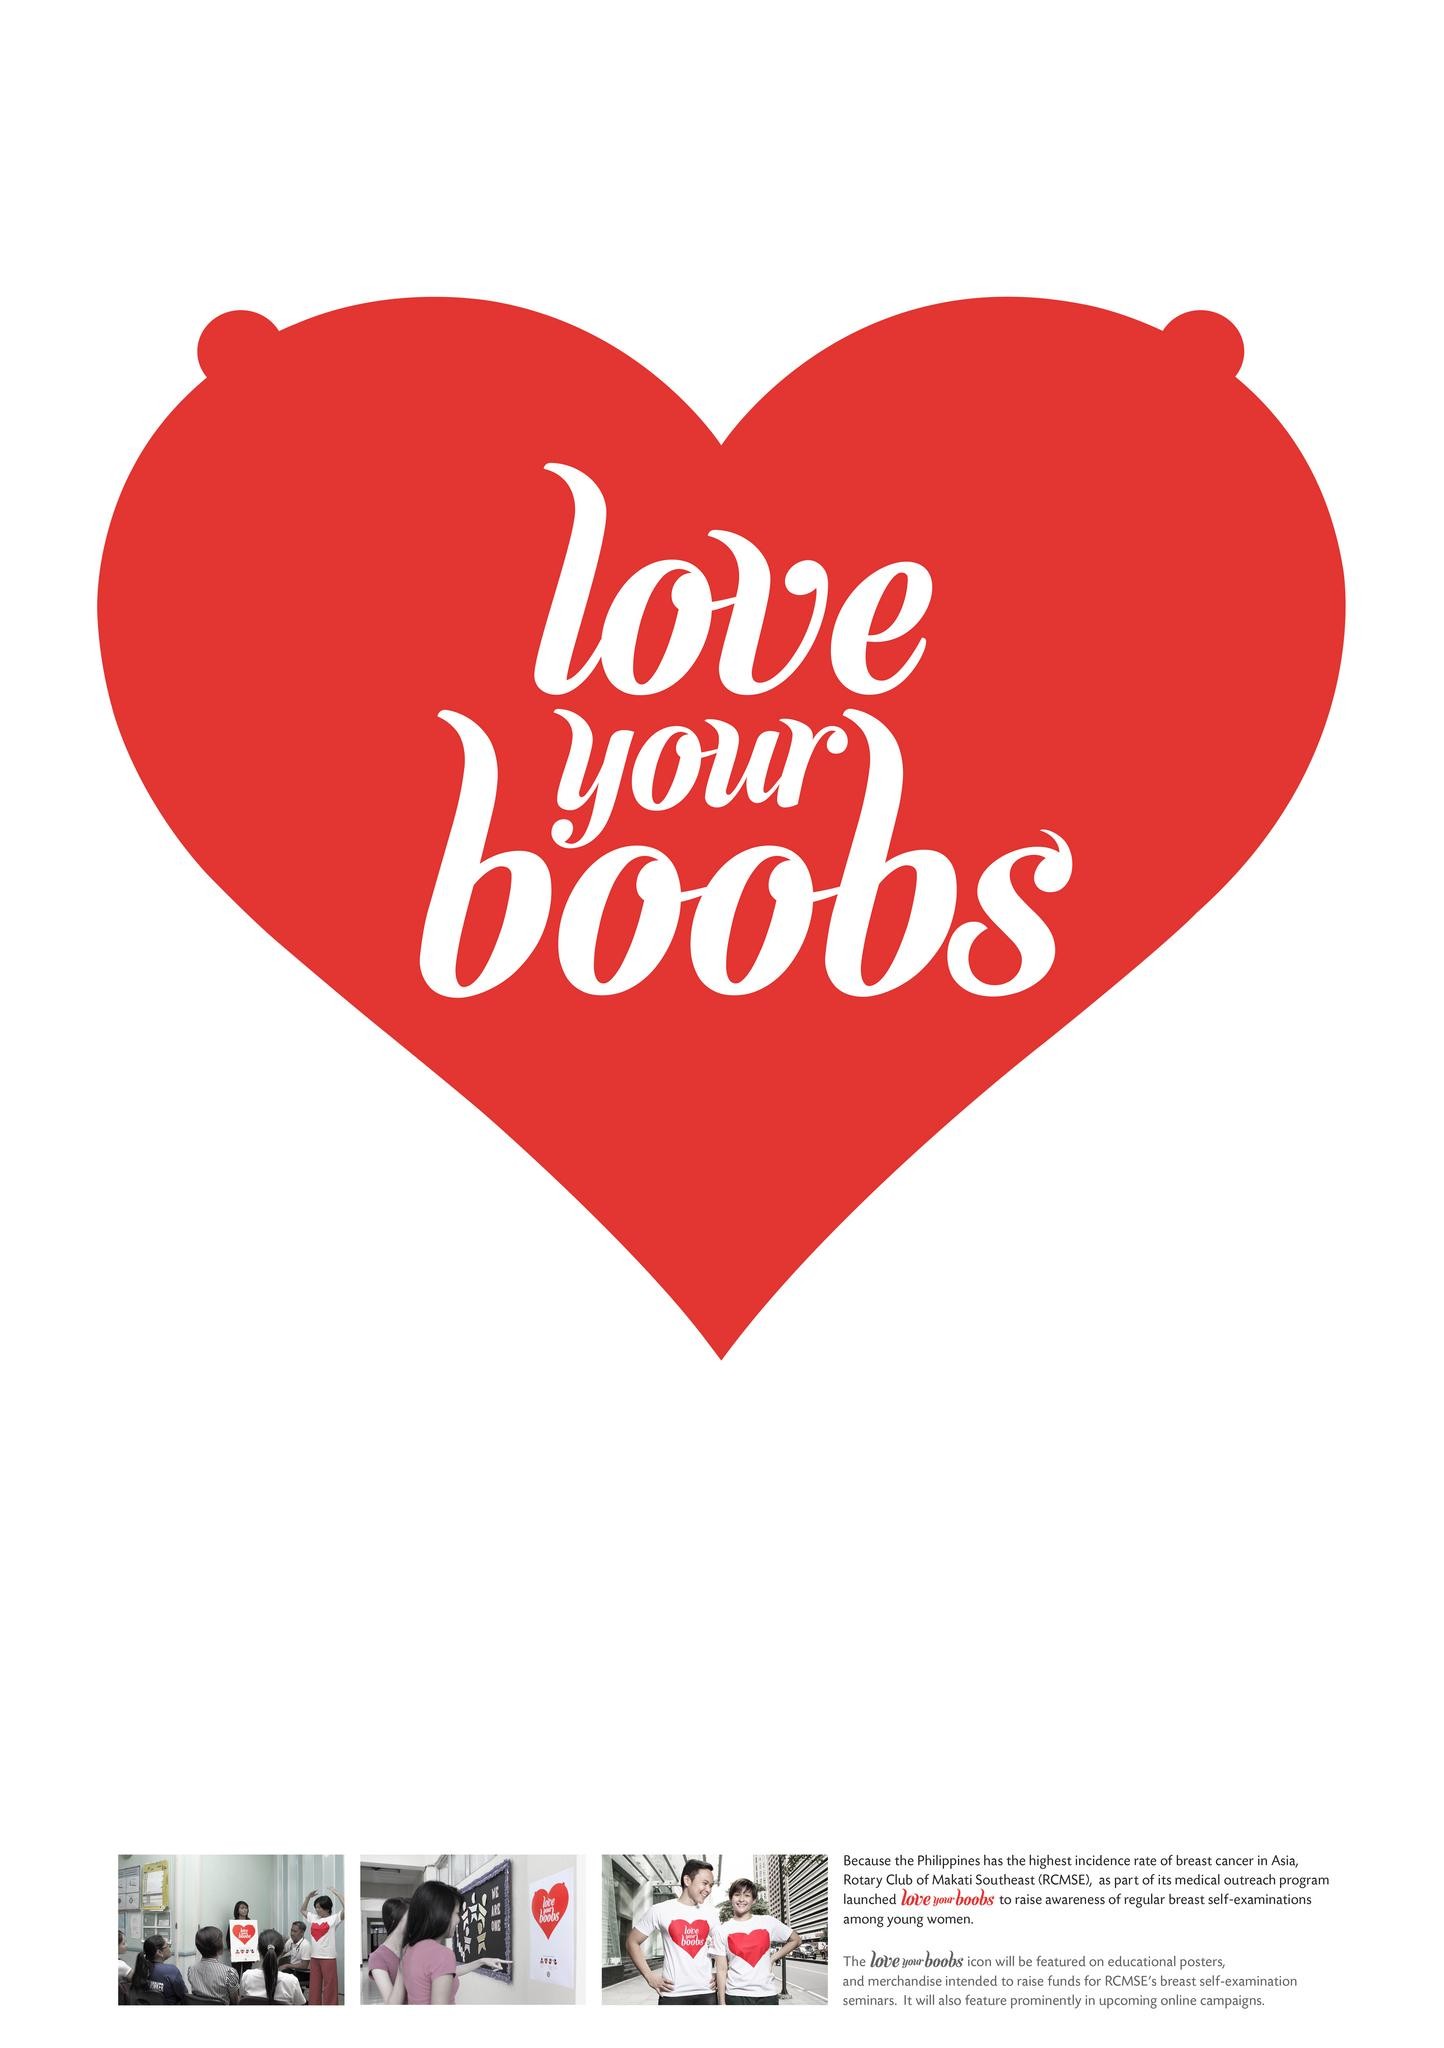 boobs - Support Campaign